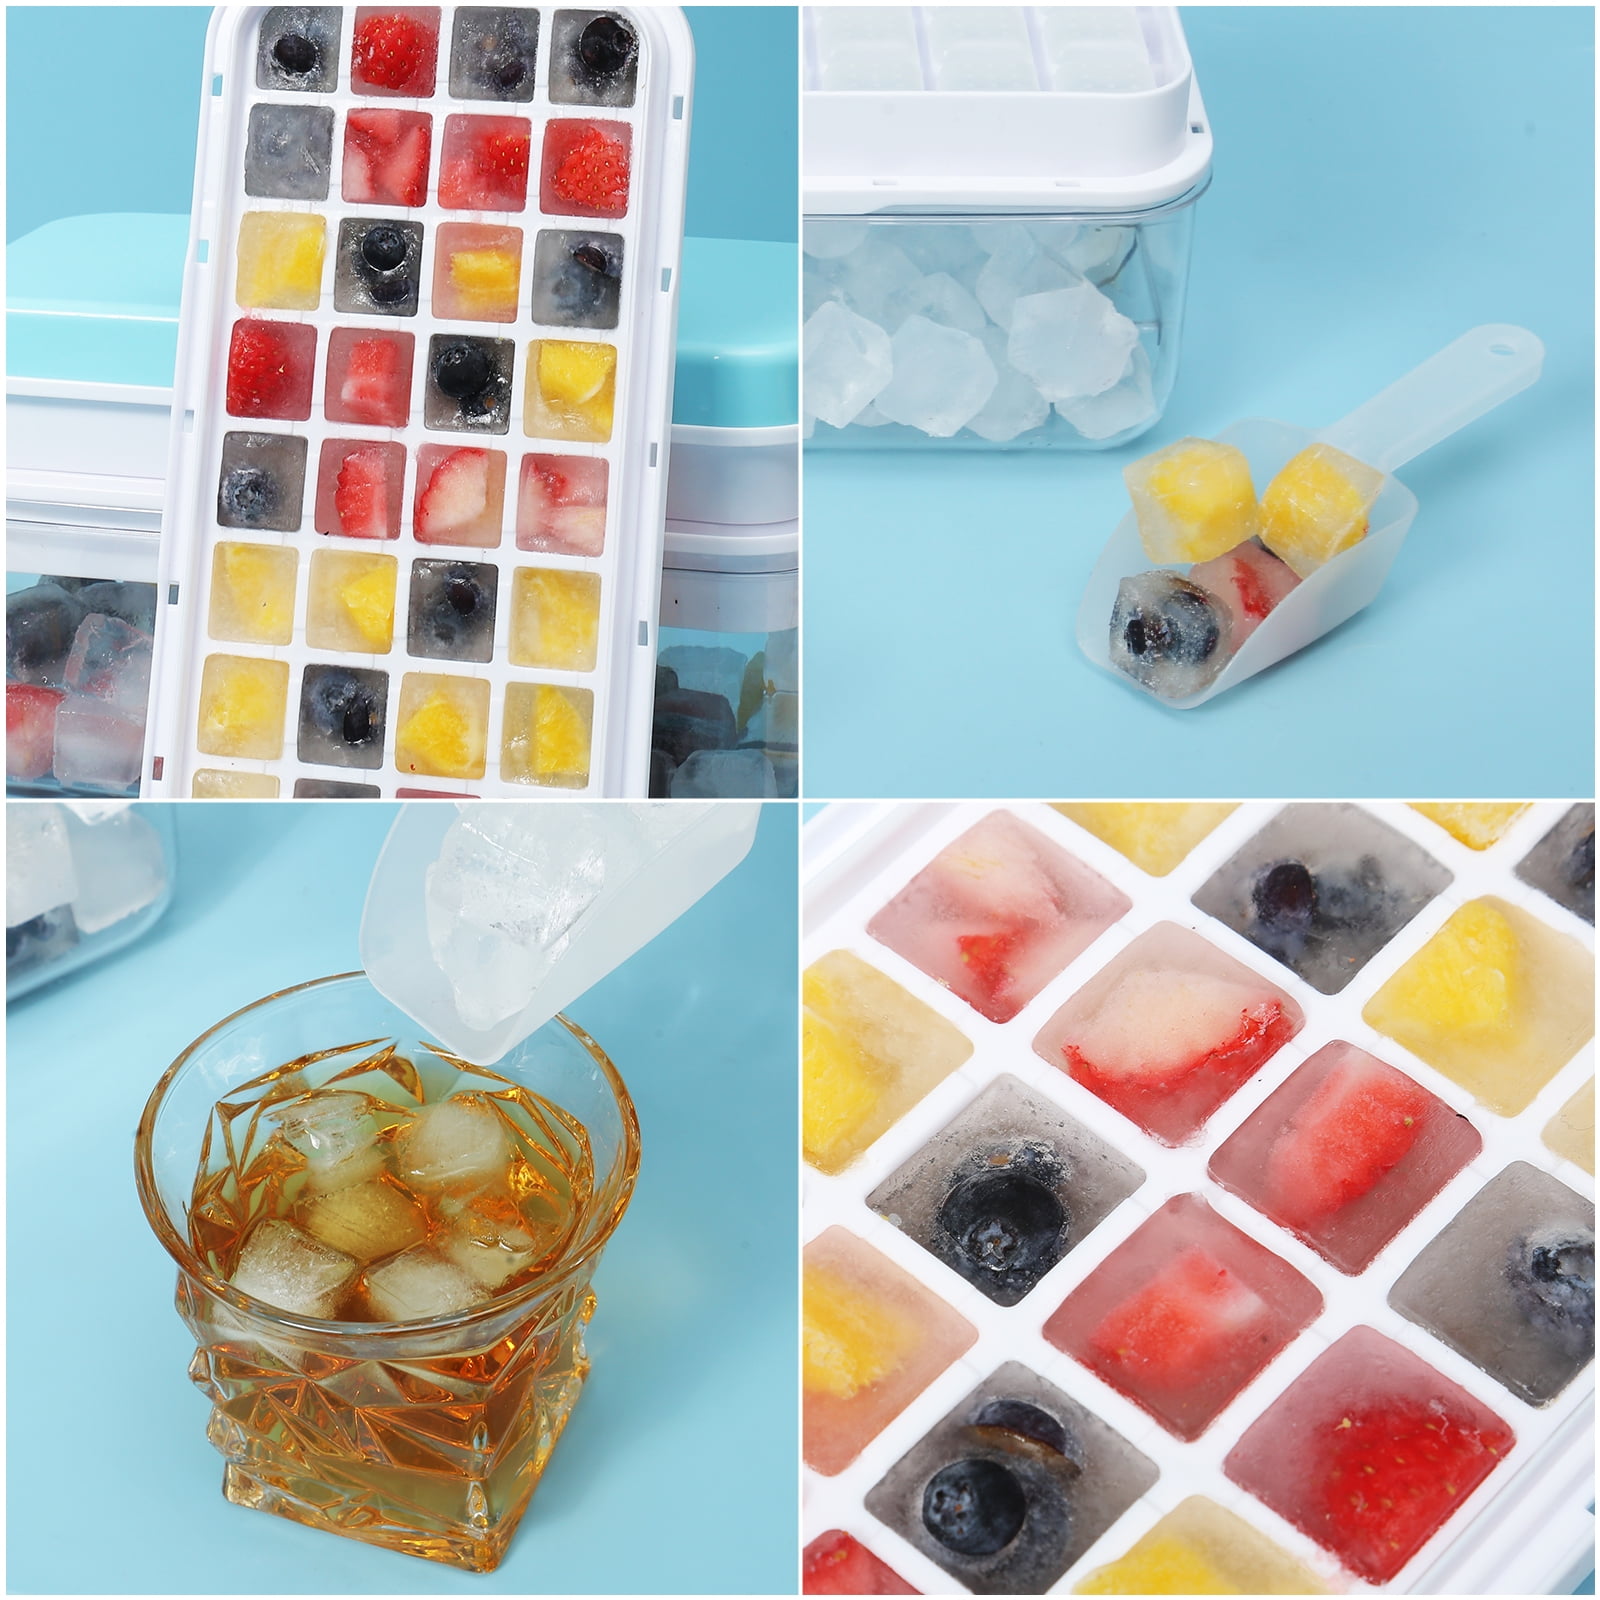 6-in-1 Ice Cube Maker Ice Cube Tray with Lid and Bin, Silicone Ice Trays  for Freezer,Ice Cube Molds Comes With Ice Contain